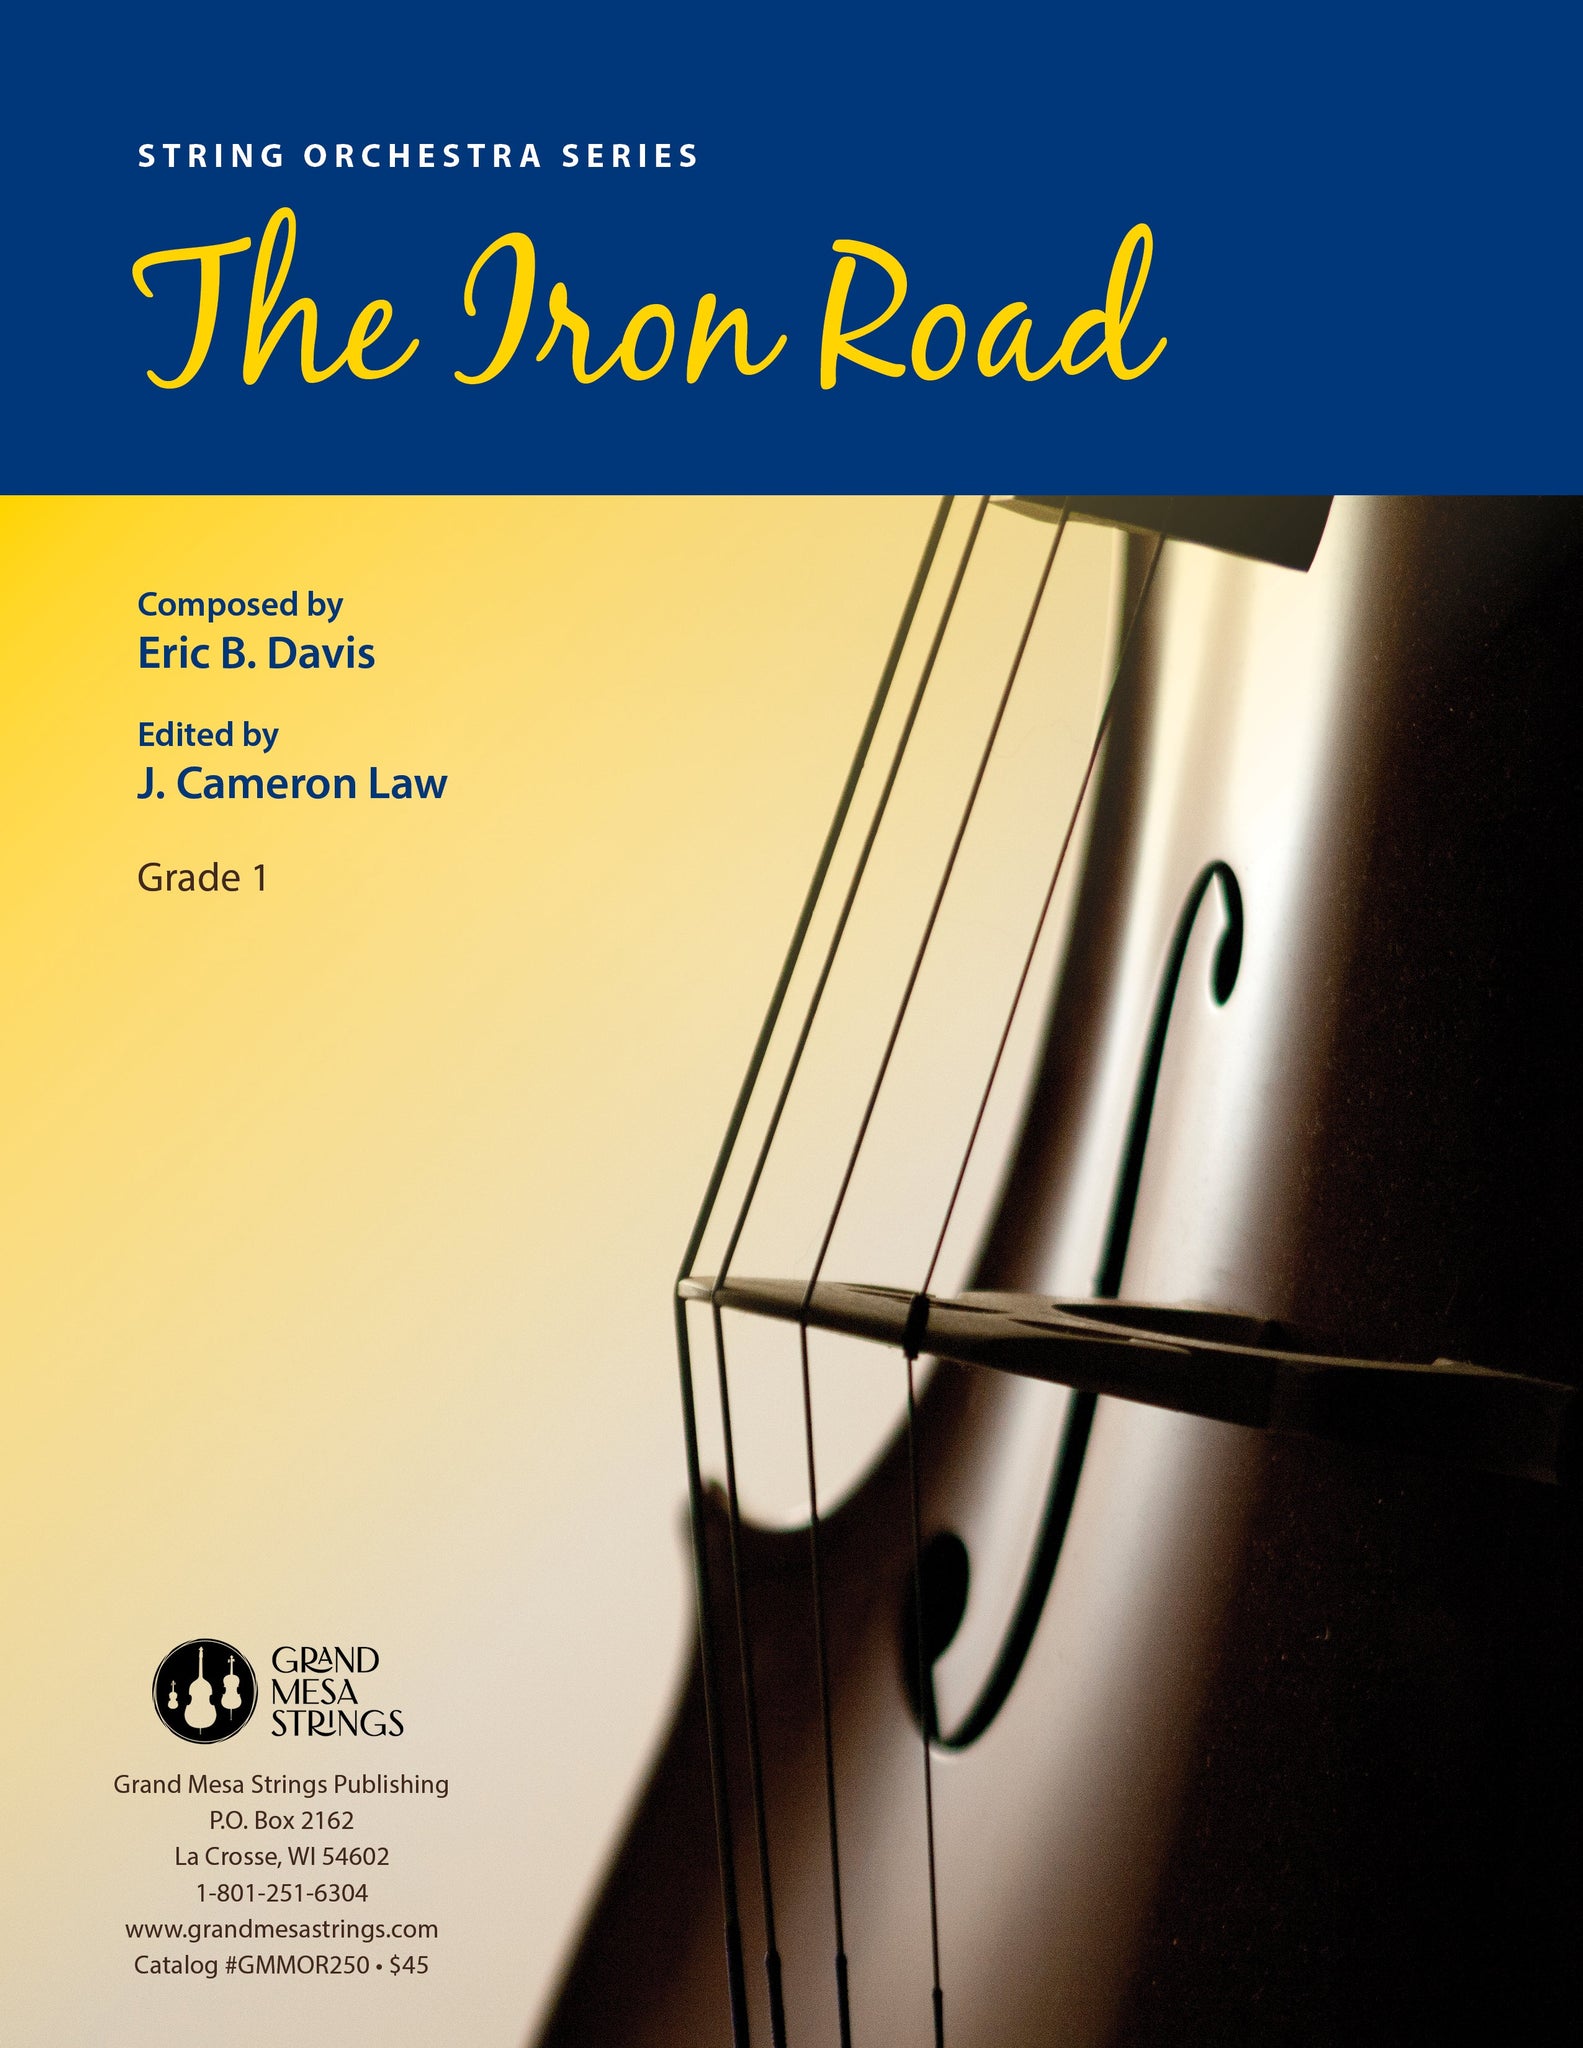 Strings sheet music cover of The Iron Road, composed by Eric B. Davis.